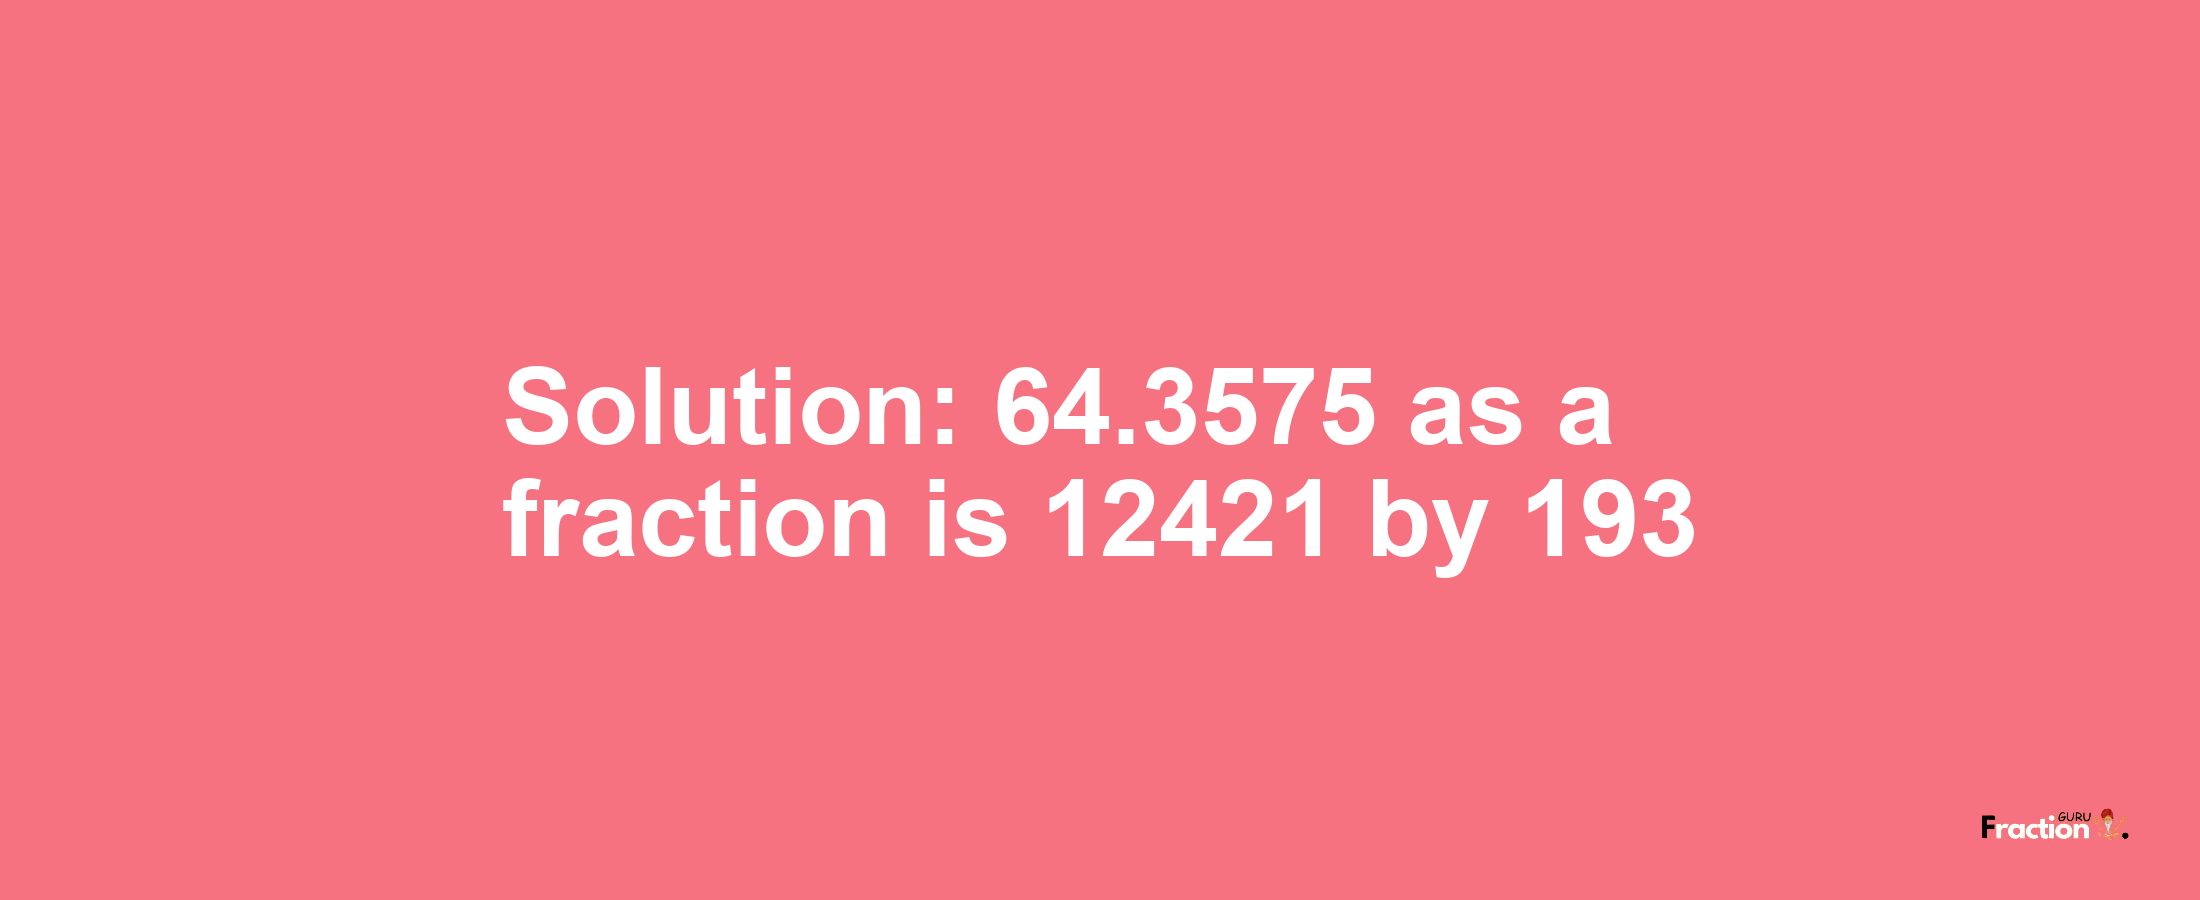 Solution:64.3575 as a fraction is 12421/193